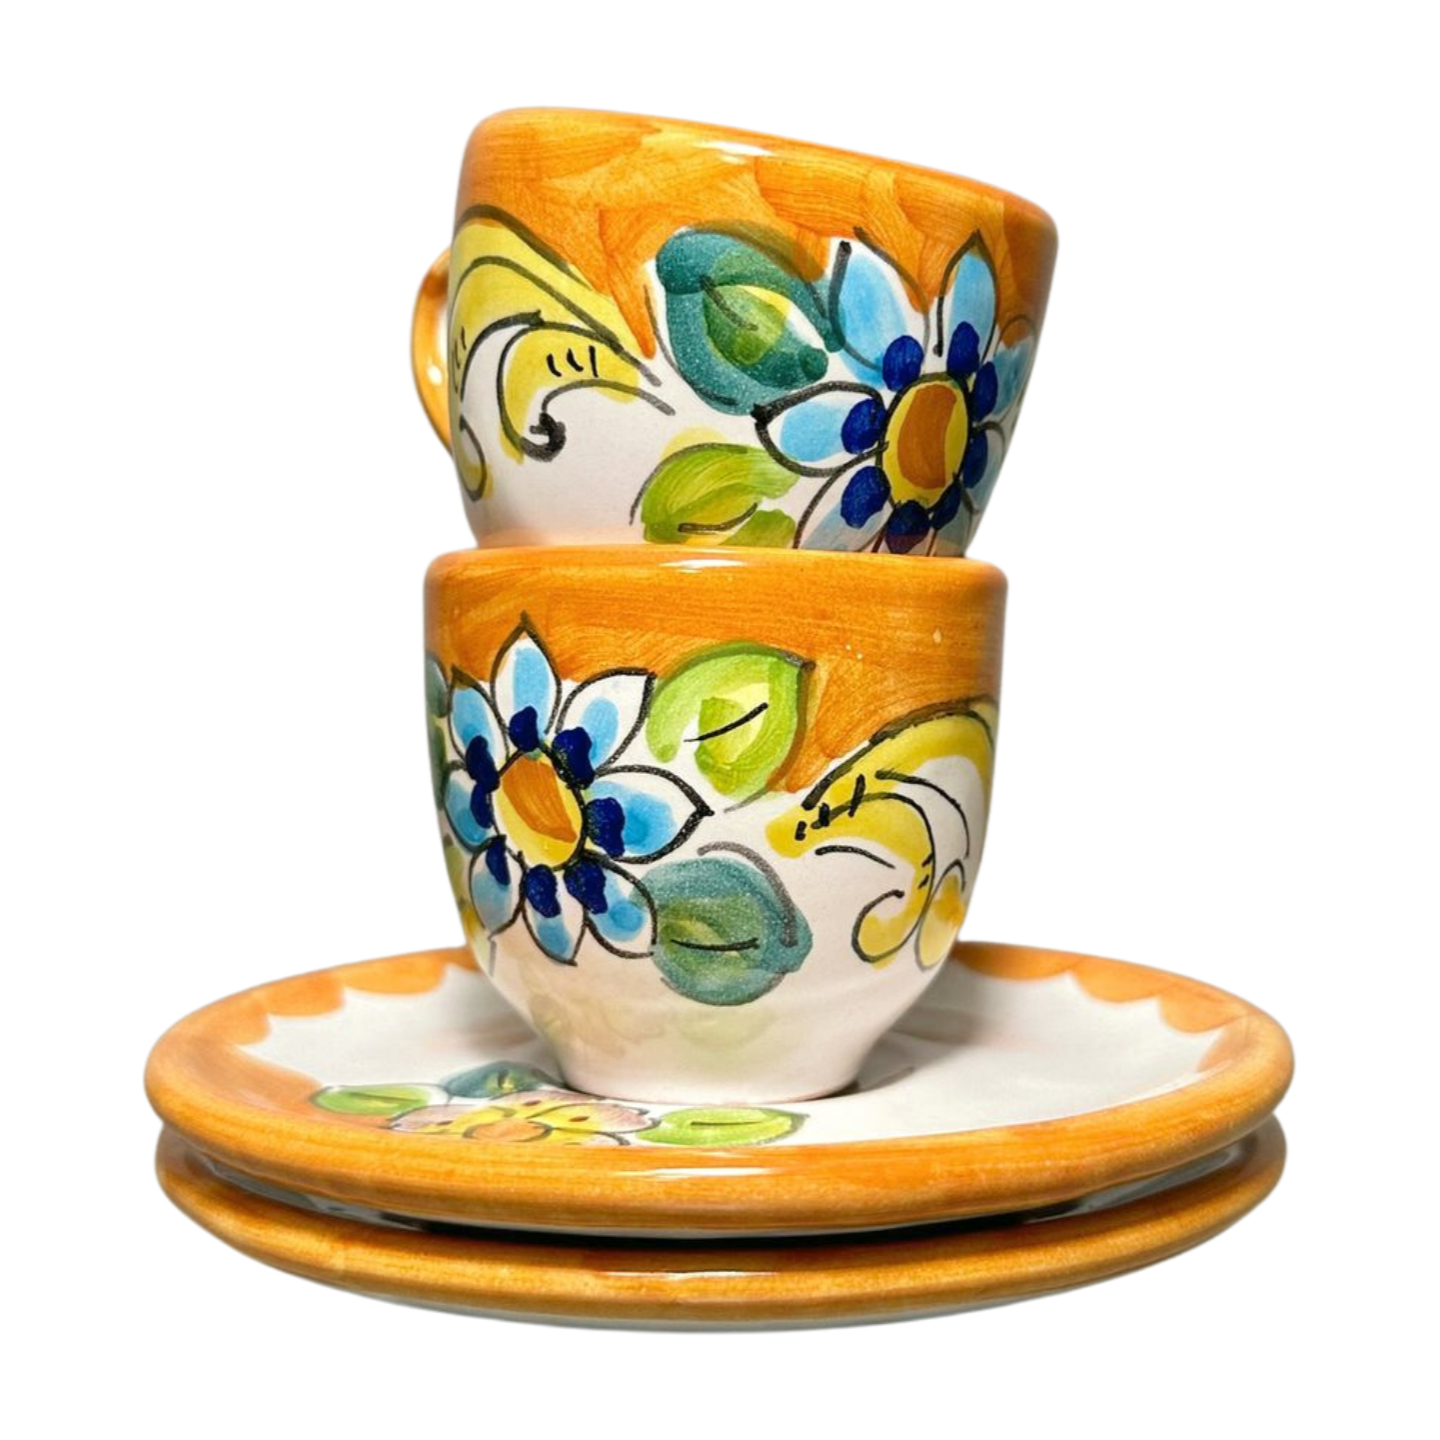 Set of 2 Italian espresso cups and saucers, featuring a blue baroque flower design. Shown here stacked.